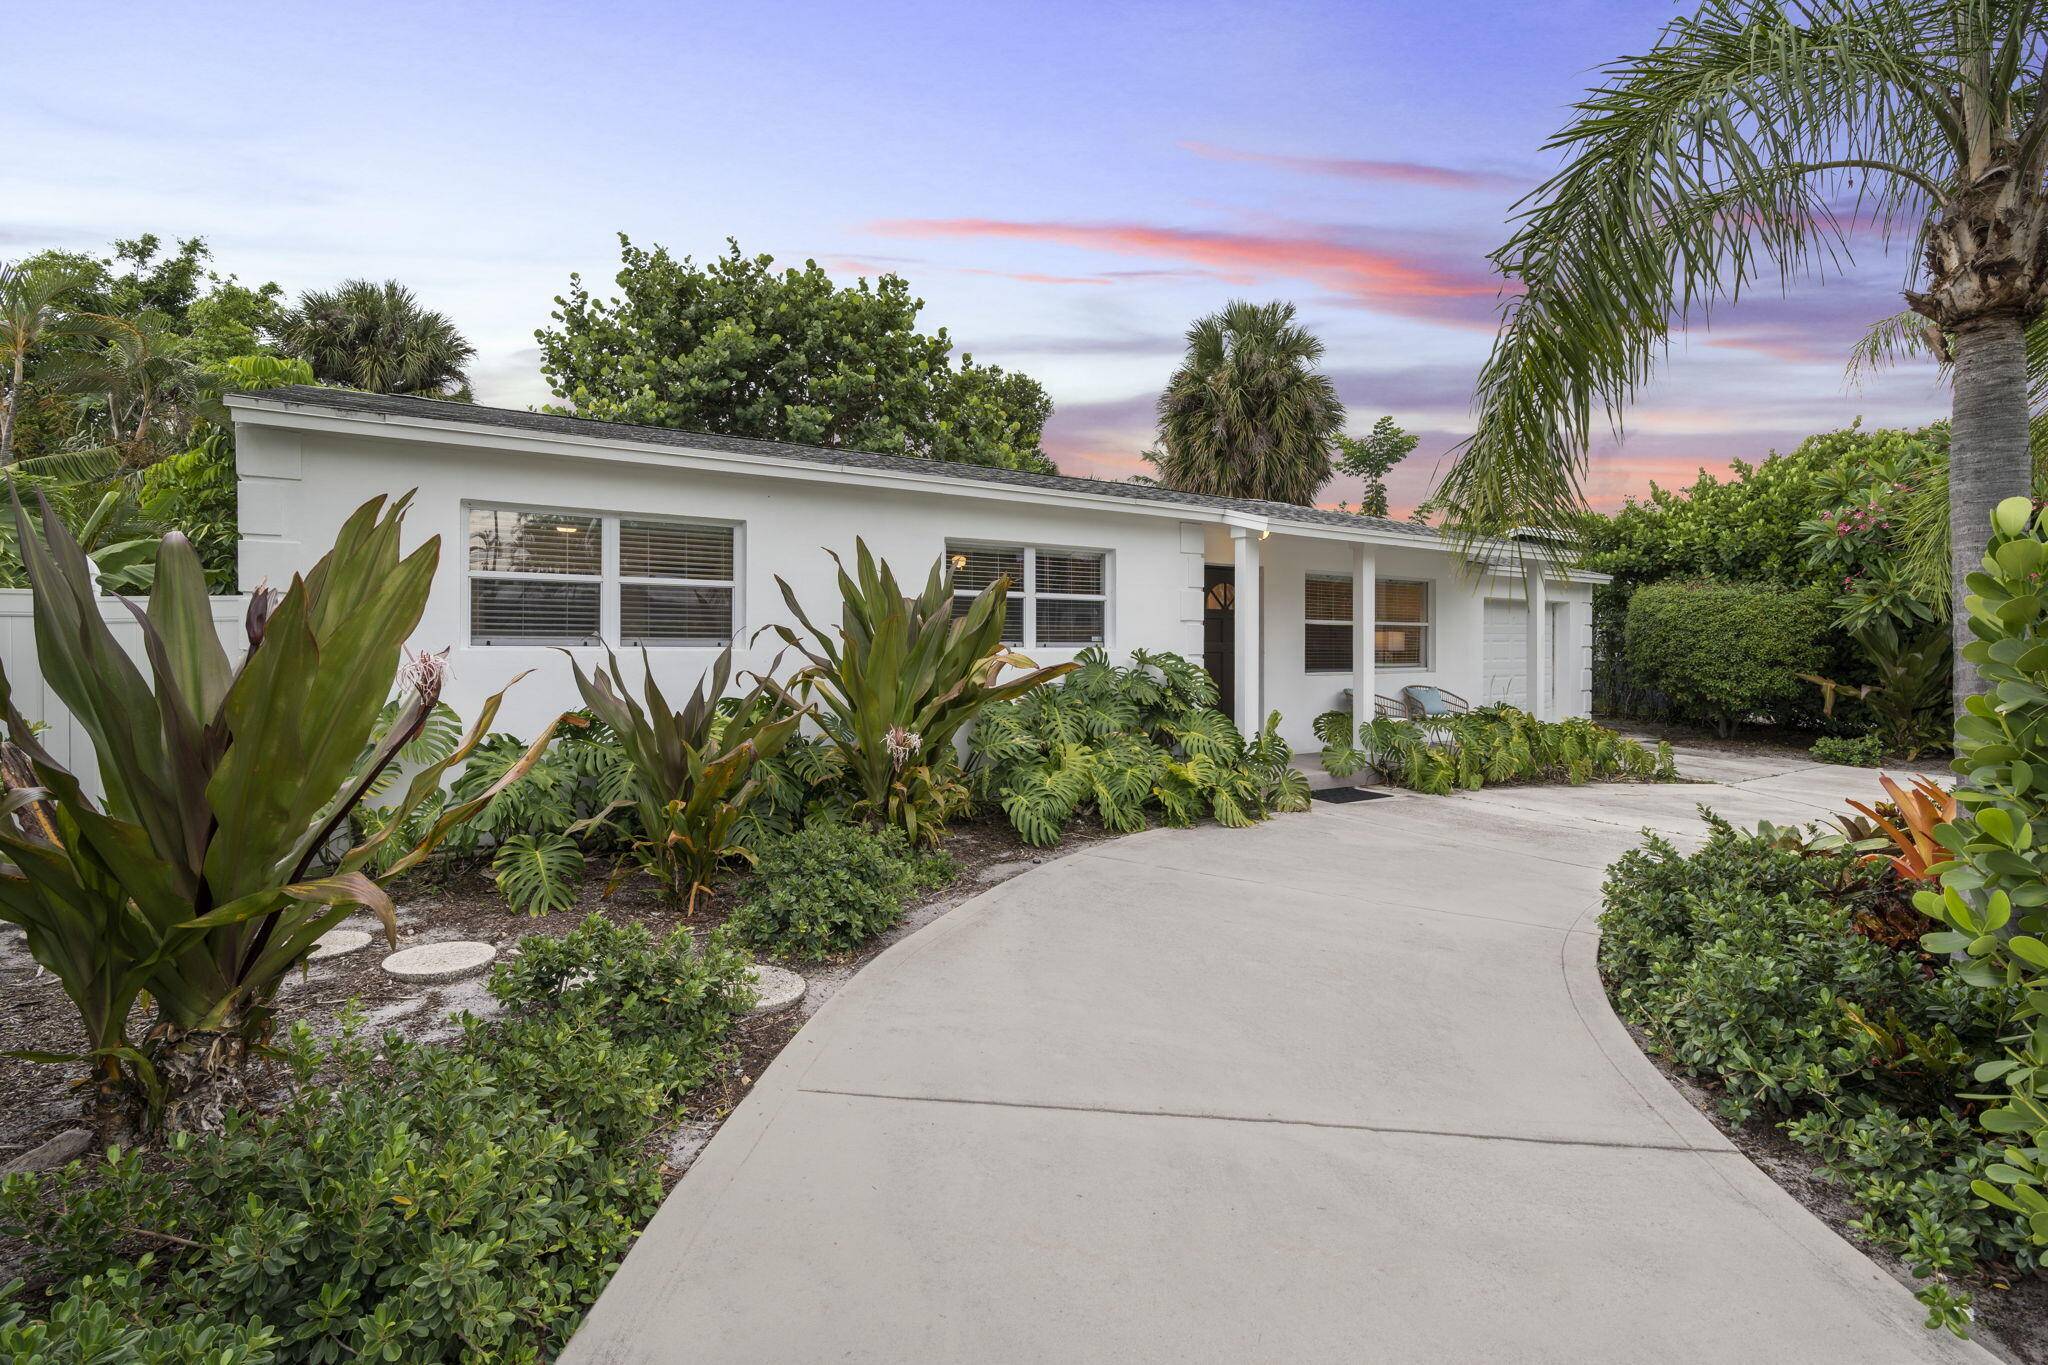 This 3 2 charmer is located in the trendy South End or ''SoSo'' neighborhood and offers close proximity the Intracoastal and Flagler Drive, Palm Beach island, and many fabulous shops ...